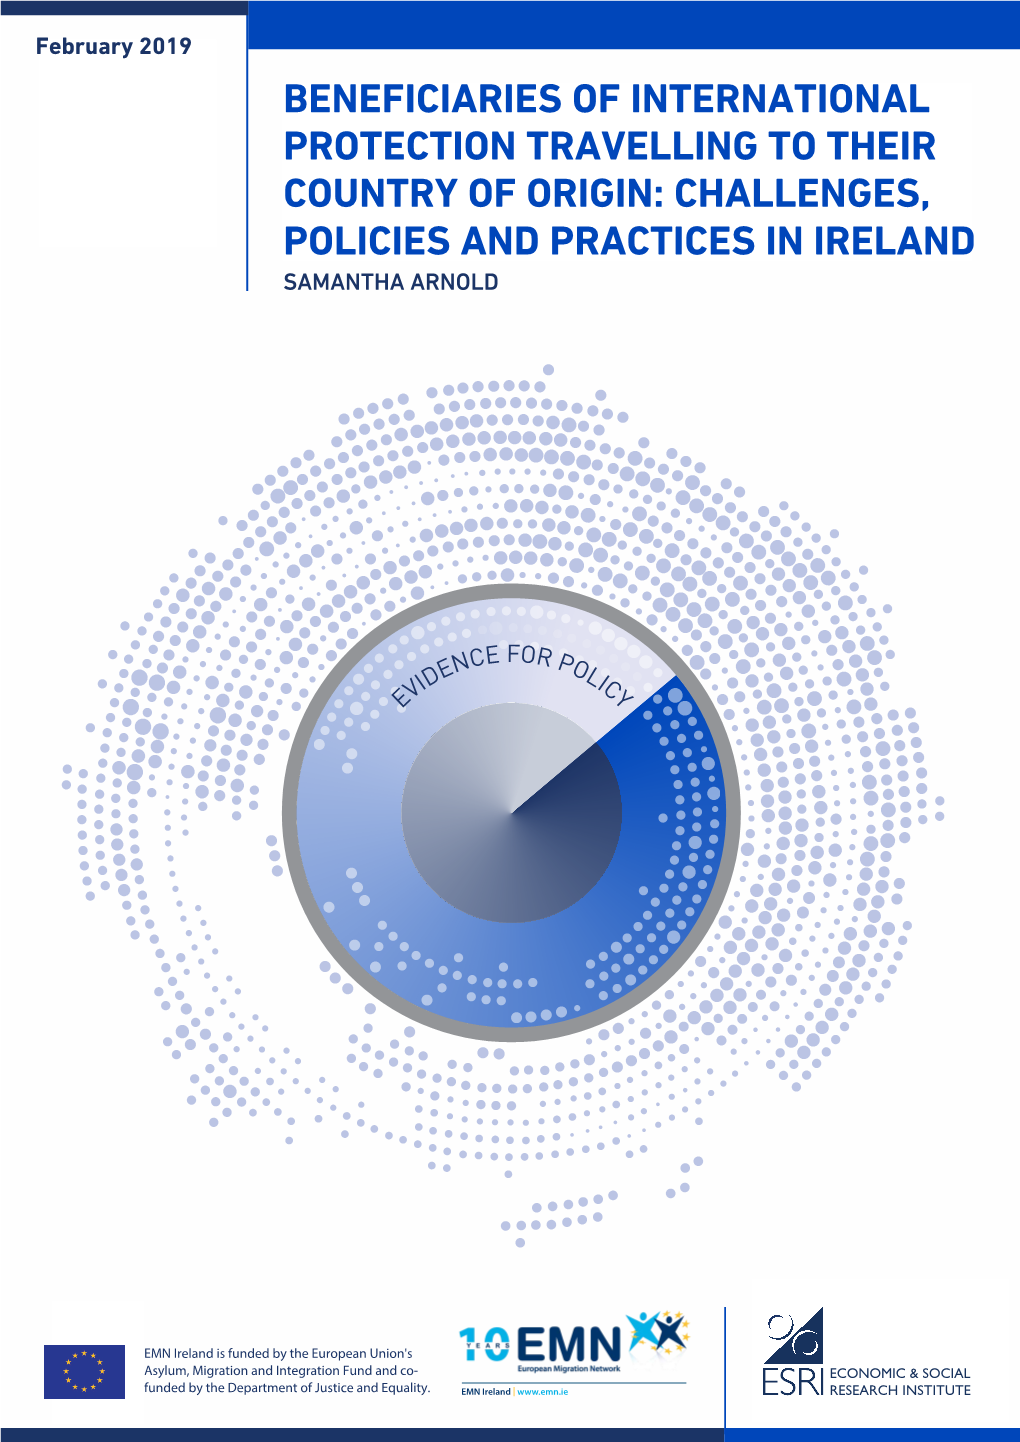 Beneficiaries of International Protection Travelling to Their Country of Origin: Challenges, Policies and Practices in Ireland Samantha Arnold